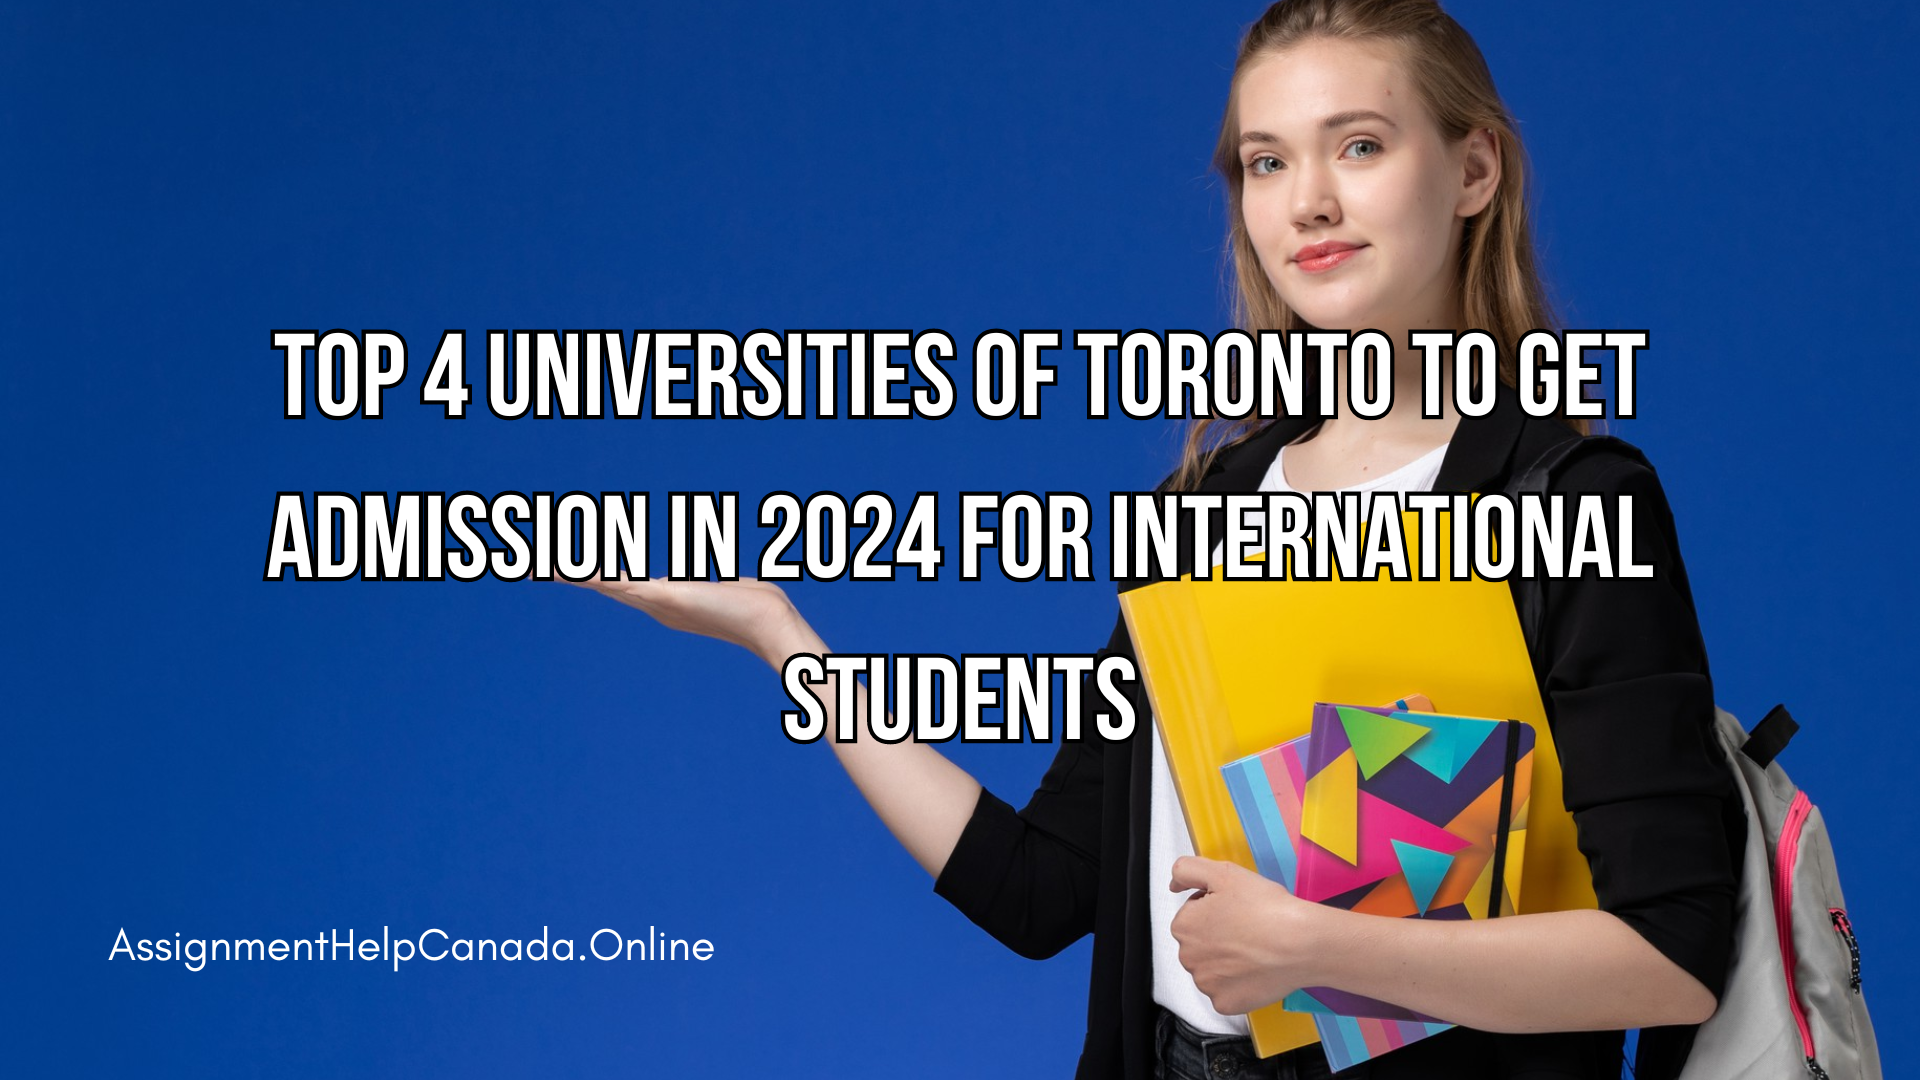 Top 4 Universities of Toronto to Get Admission in 2024 for International Students